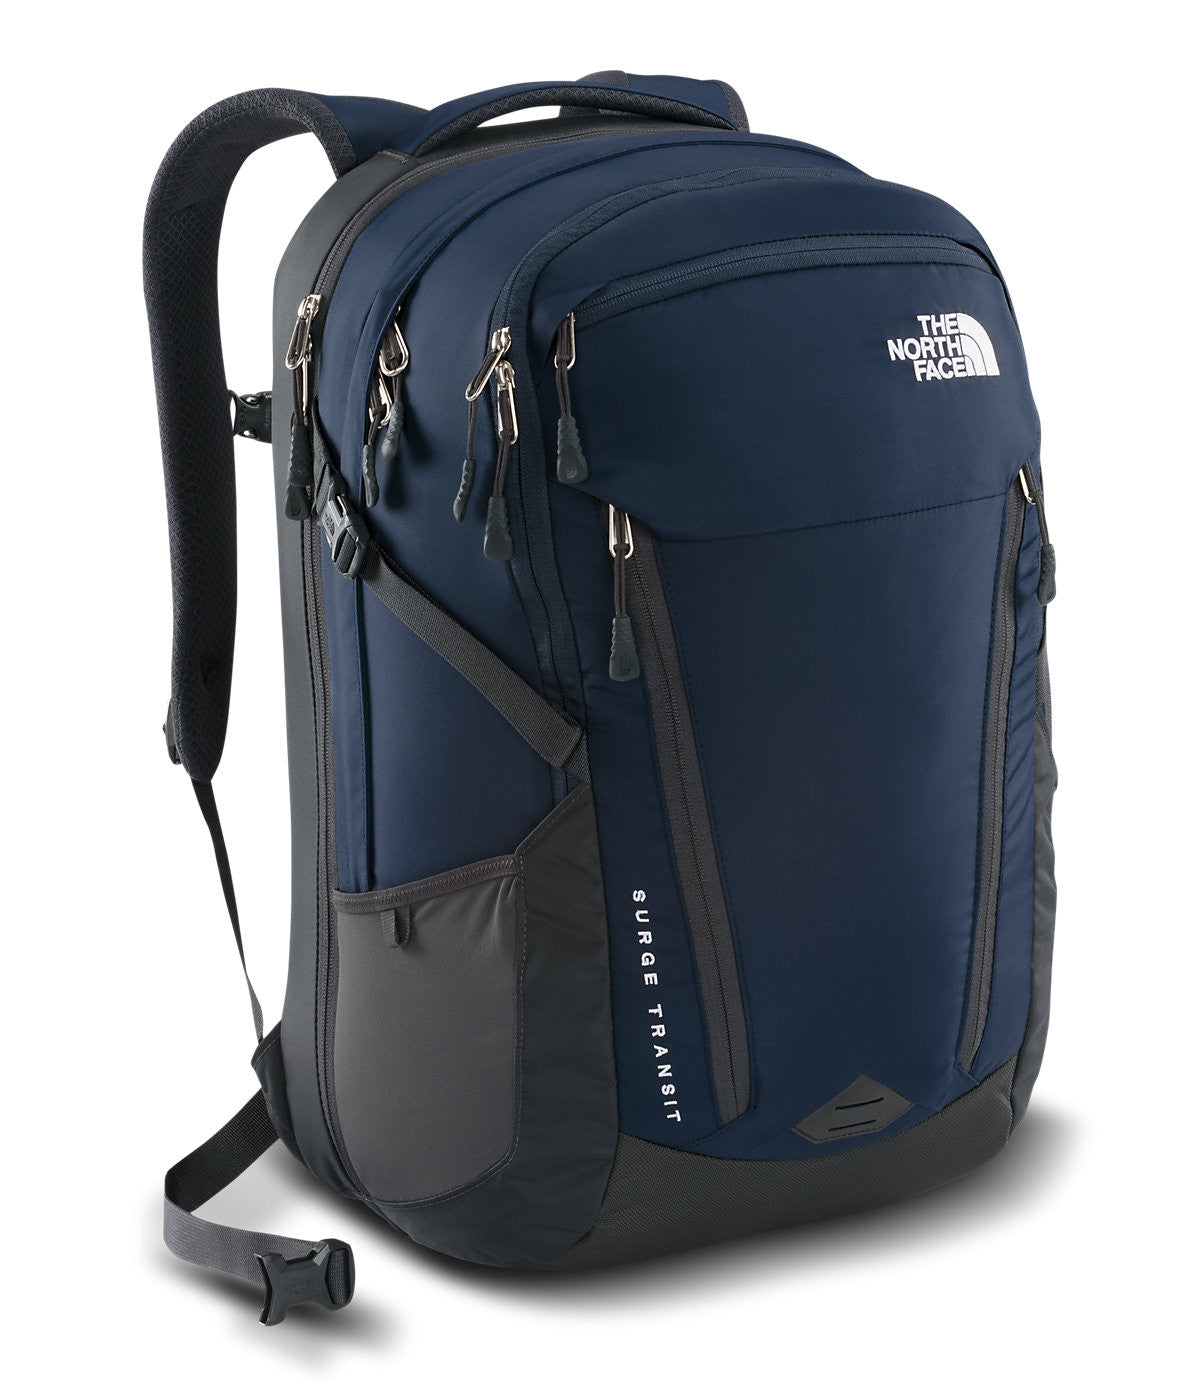 The North Face Surge Transit